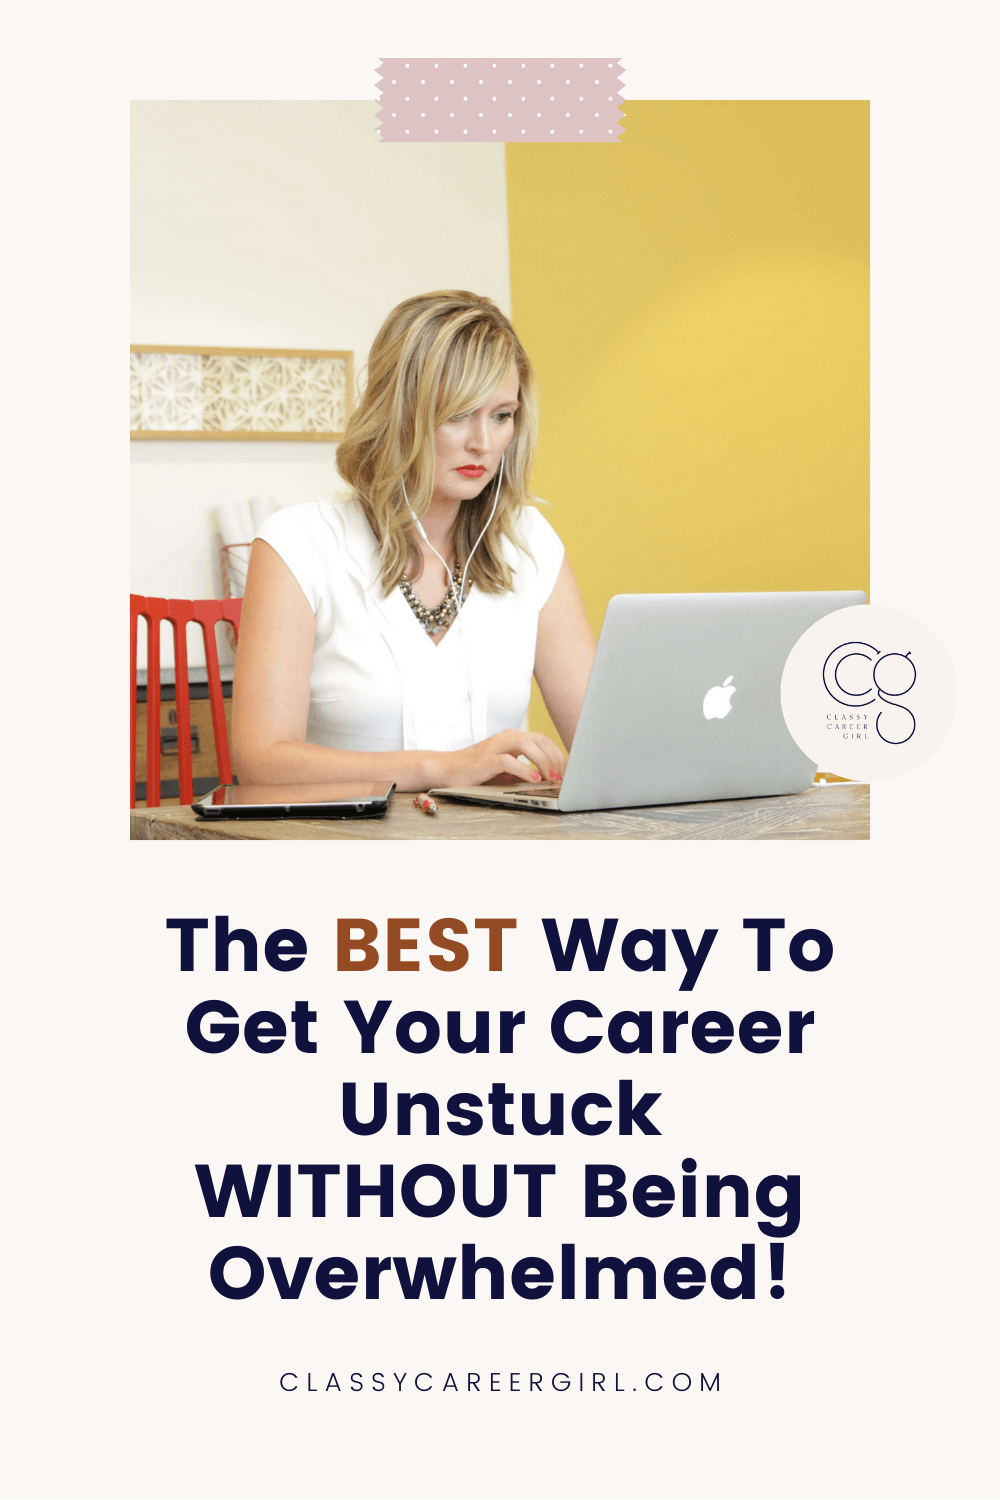 The BEST Way To Get Your Career Unstuck WITHOUT Being Overwhelmed